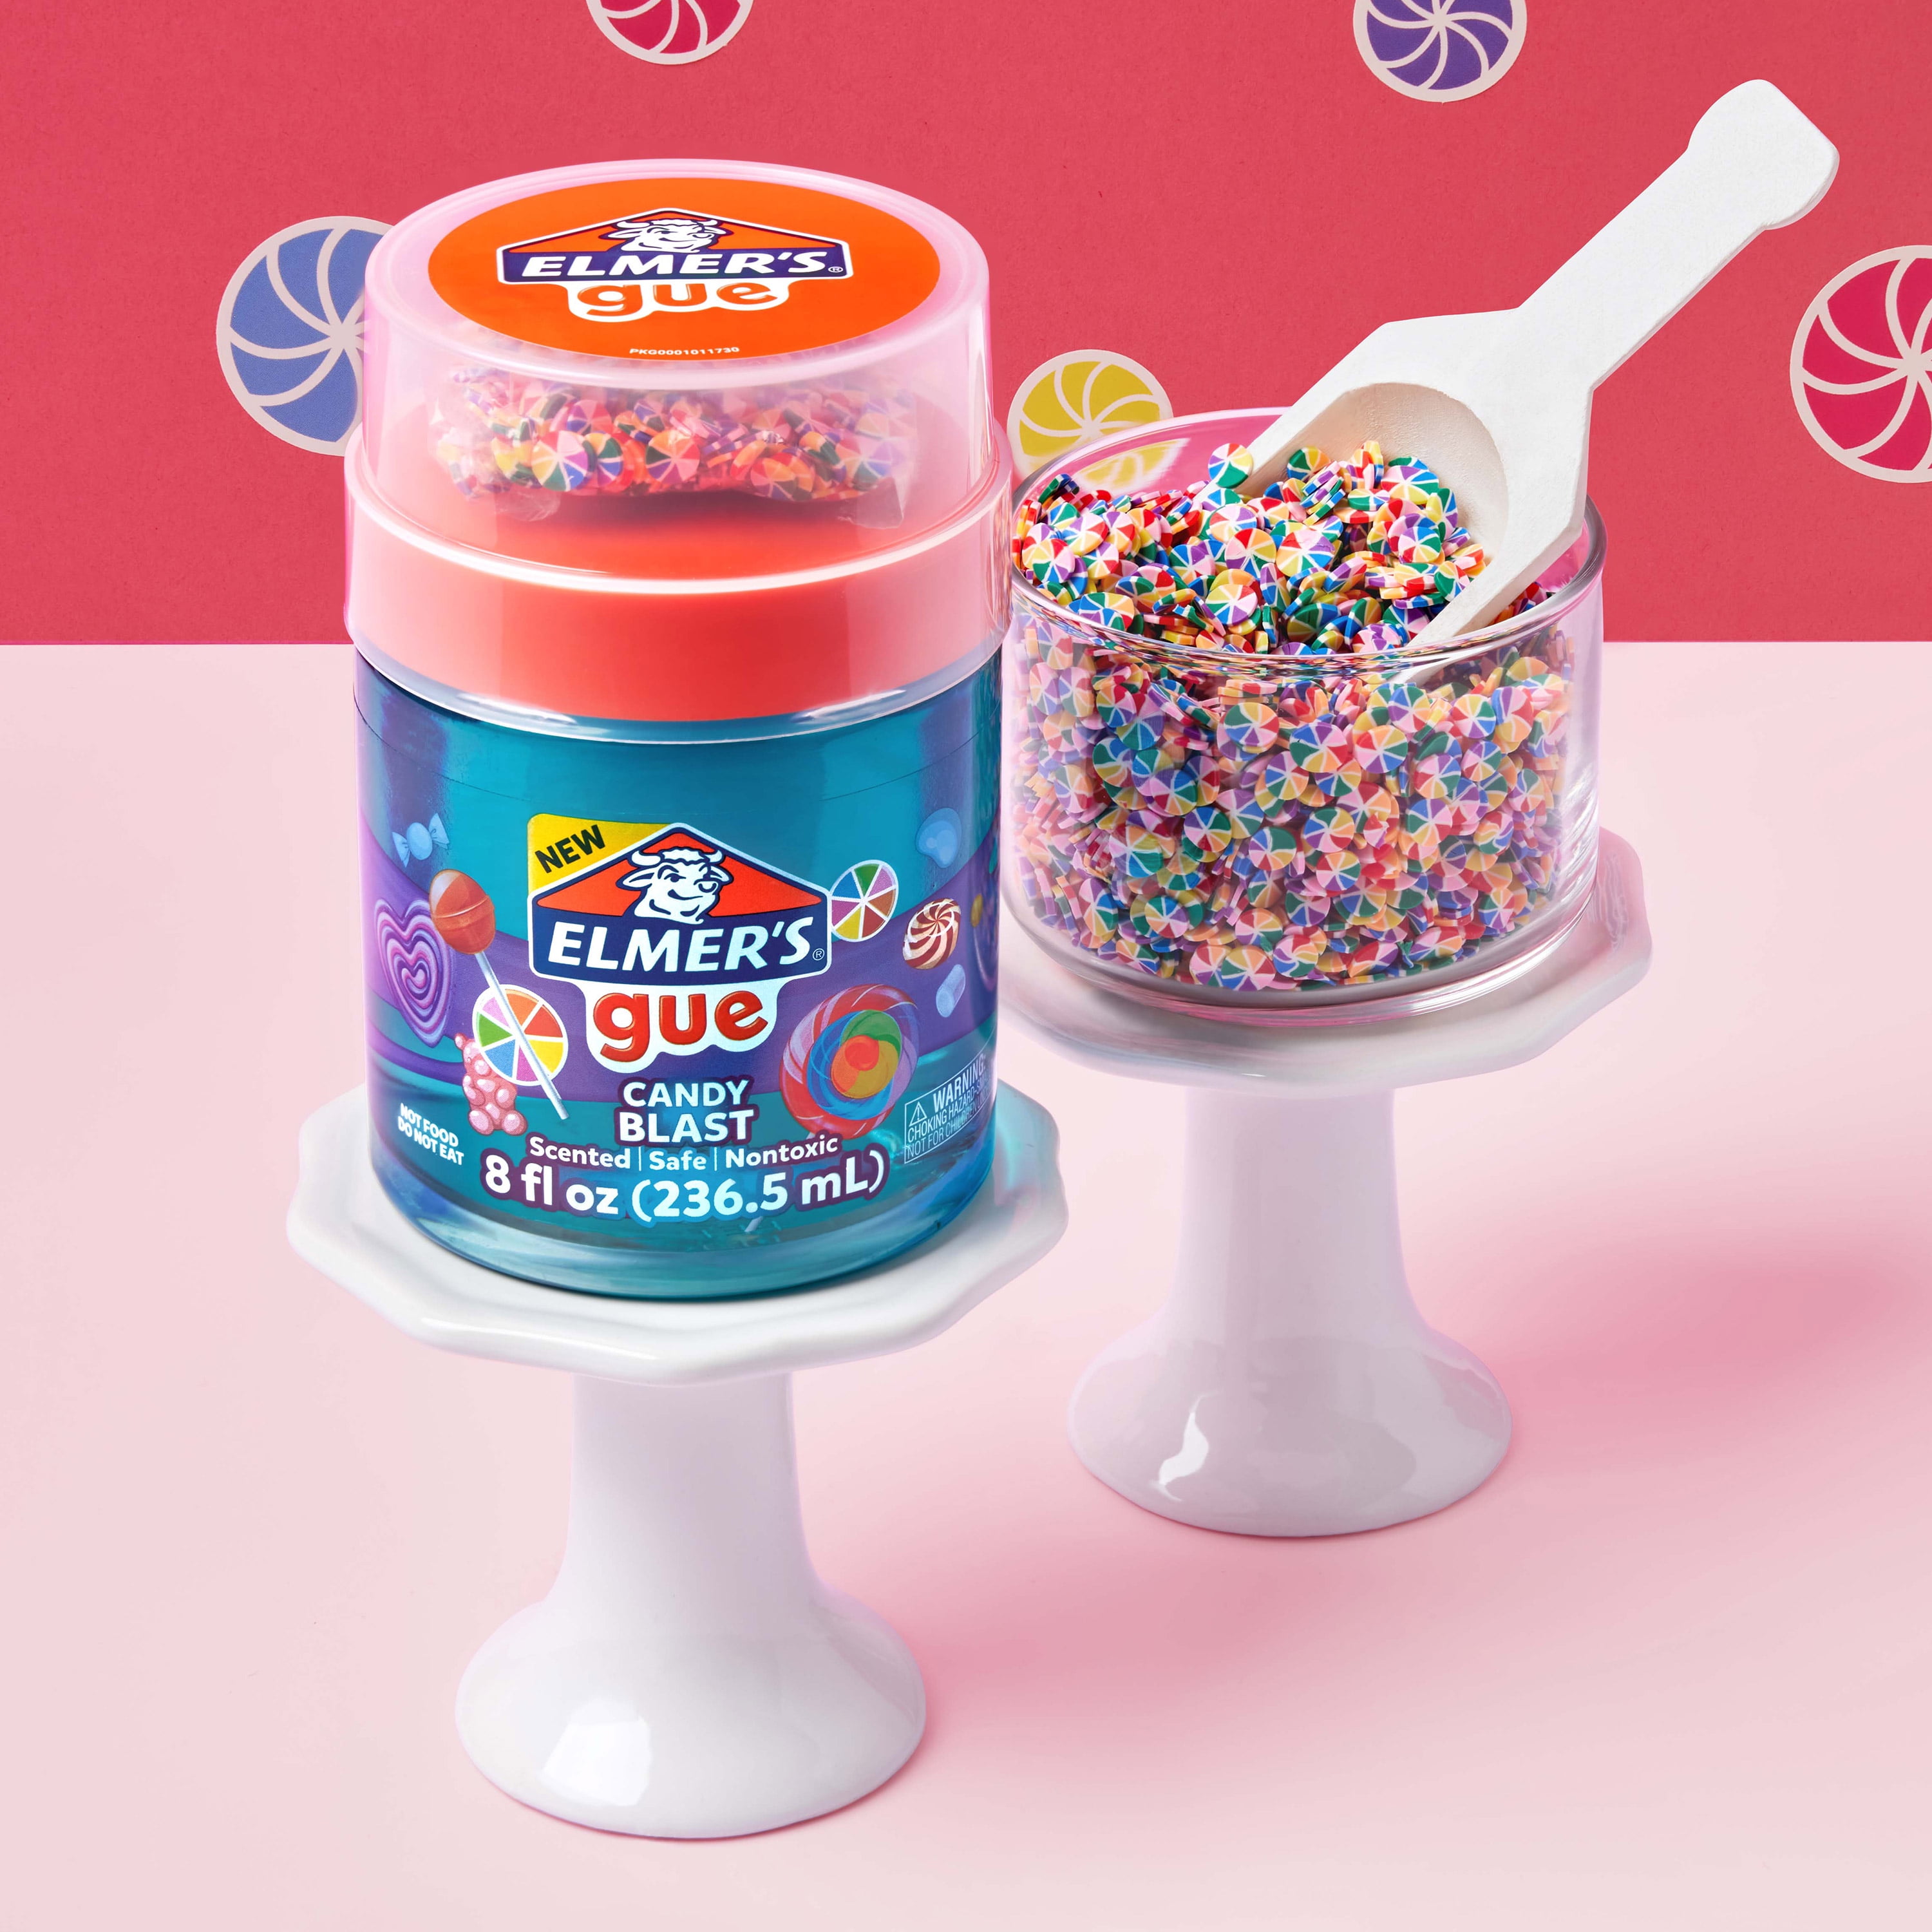 Kit De Slime Elmers Cotton Candy Fizz Y Hot Chocolate Hecho